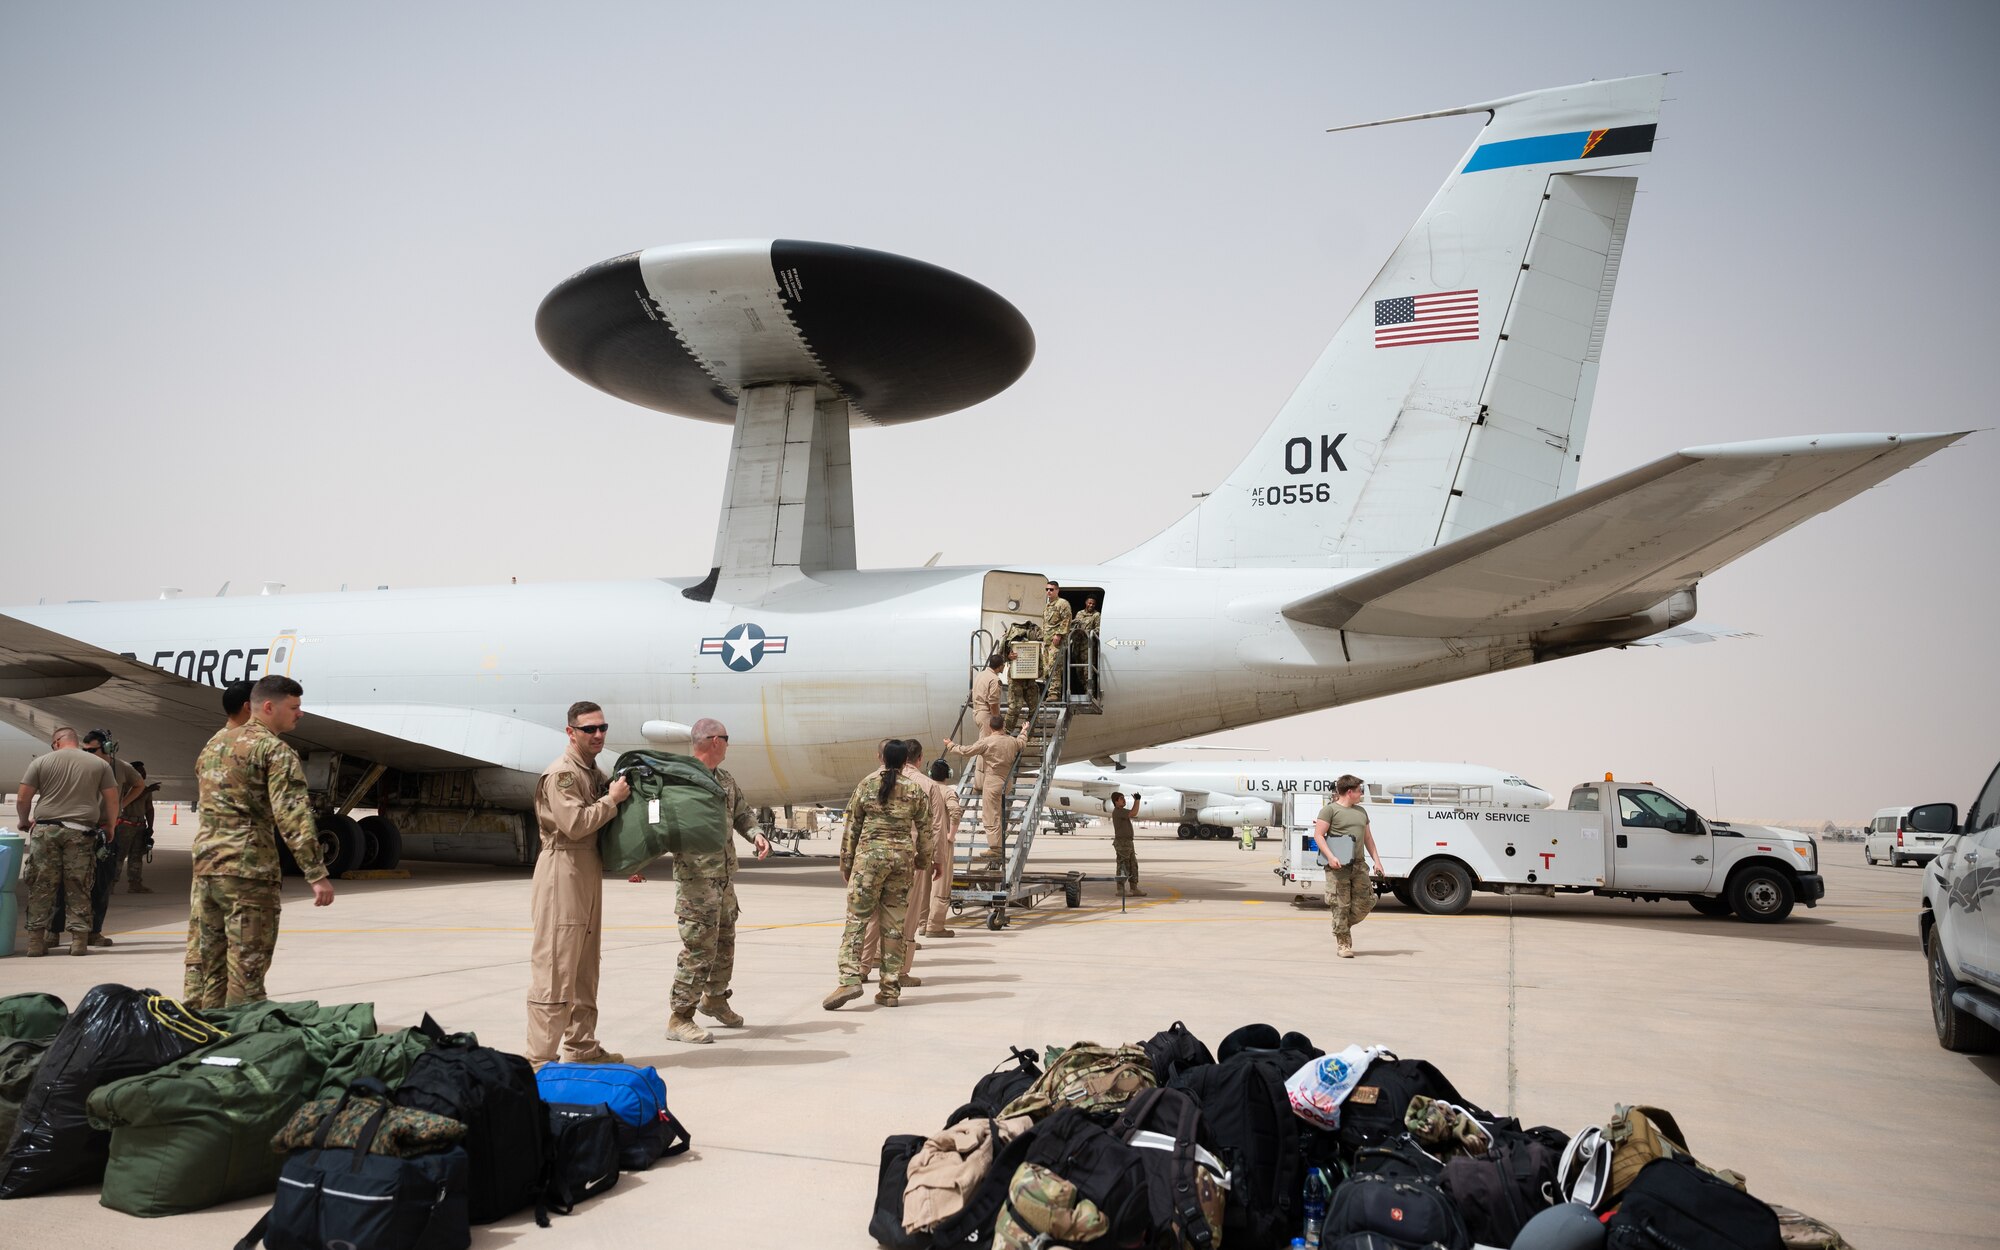 U.S. Air Force Airmen from the 968th Expeditionary Airborne Air Control Squadron unload bags from an E-3 Sentry at Prince Sultan Air Base, Kingdom of Saudi Arabia, March 6, 2022. The 968th EAACS provides airborne, command and control, all-weather surveillance and communications to the U.S. and its coalition partners. (U.S. Air Force photo by Senior Airman Jacob B. Wrightsman)